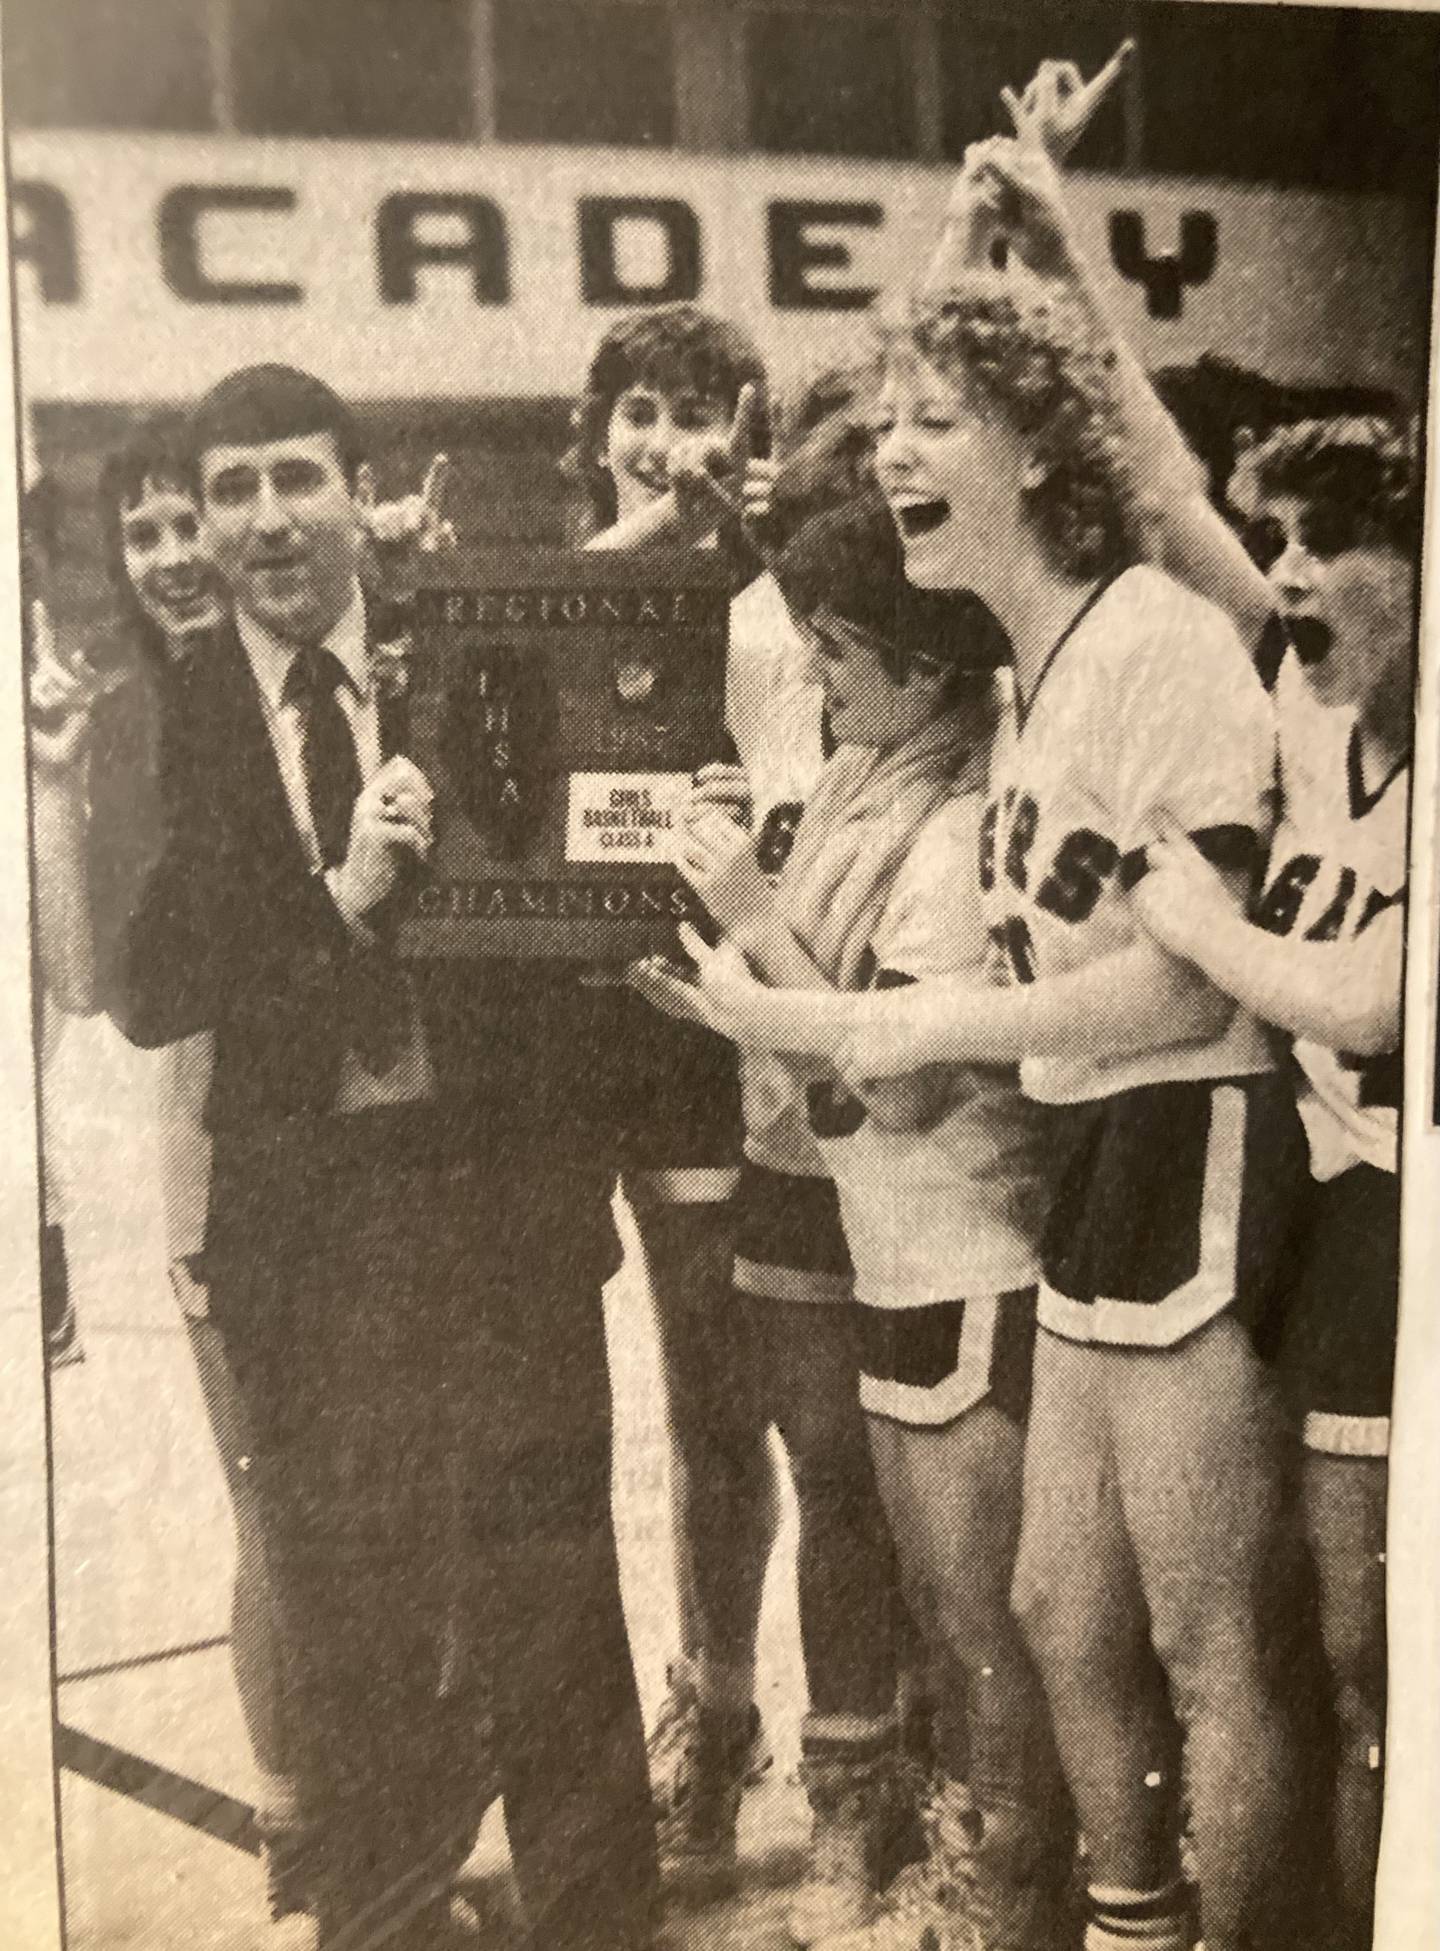 PHS coach John Smith and the Tigresses celebrate their regional championship in 1987.